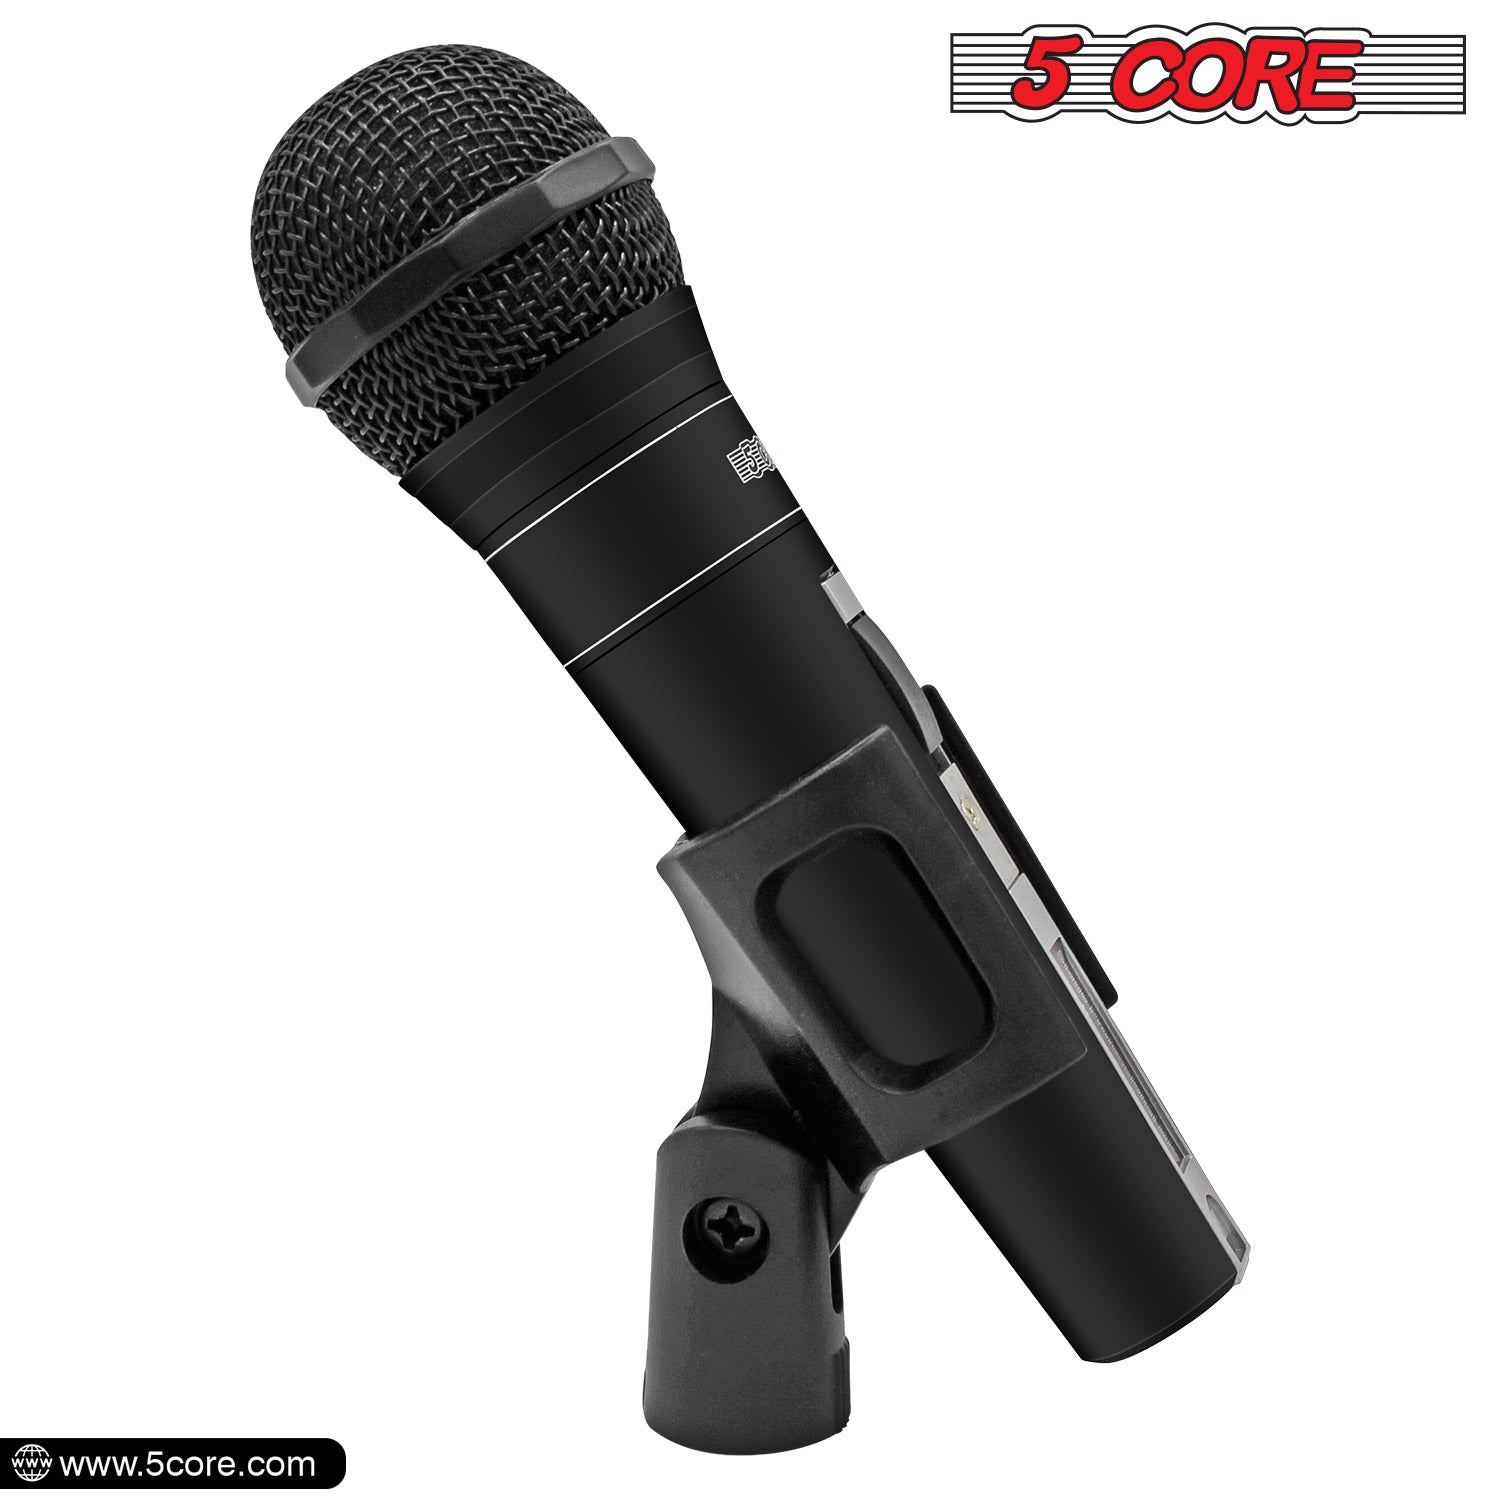 Elevate Your Voice: 5 Core PM 757 Karaoke Microphone for Singing